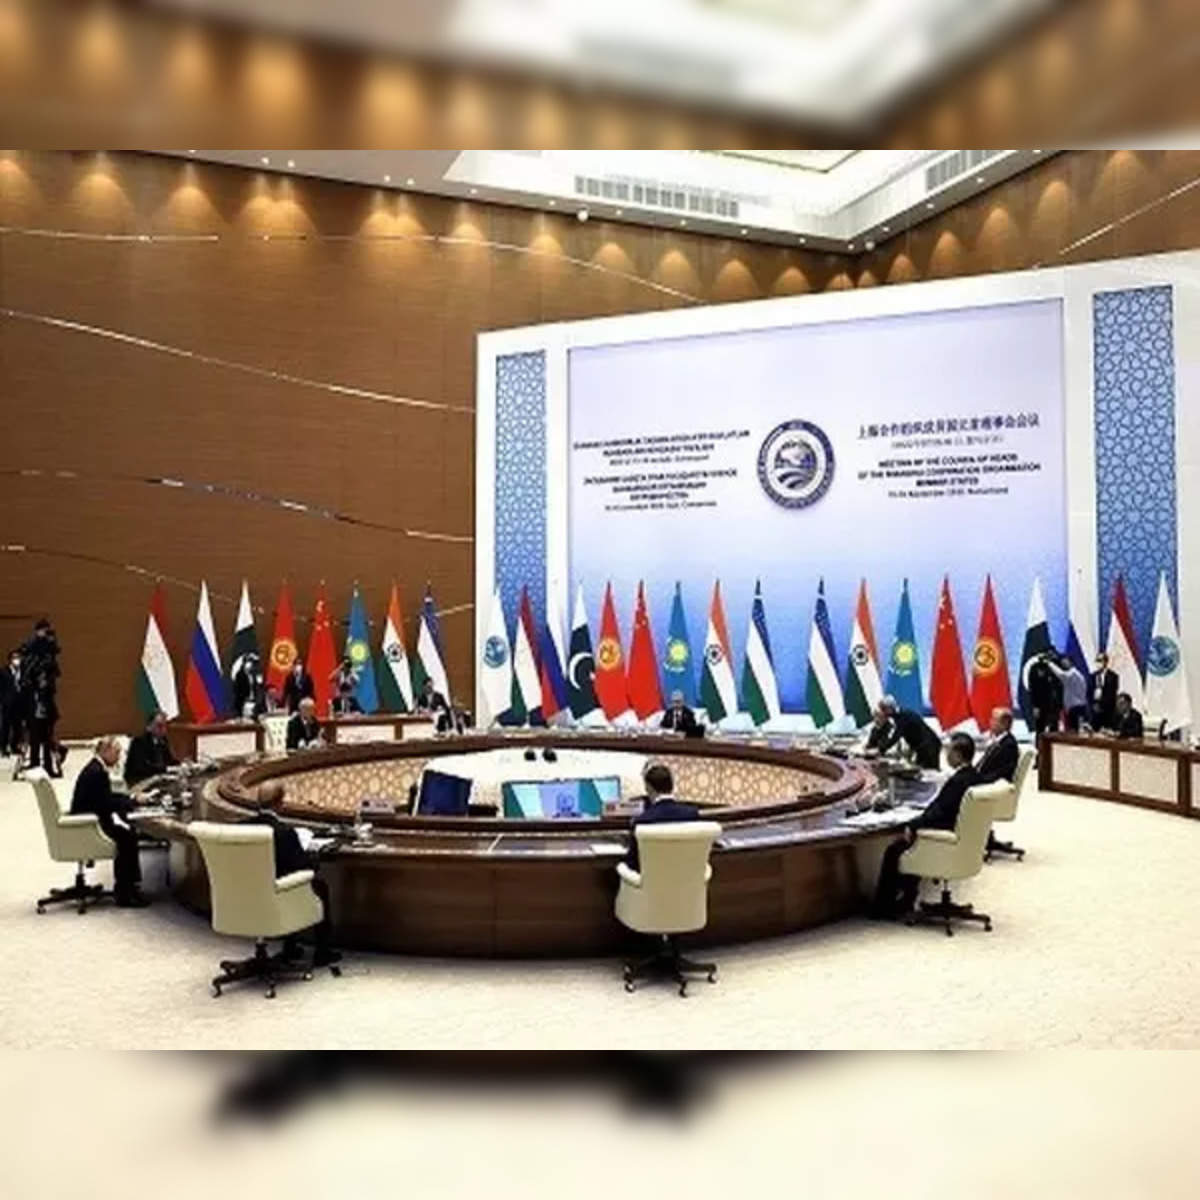 SCO Summit: Leaders expected to discuss prospects of multilateral  cooperation at SCO Summit in Astana, says MEA - The Economic Times